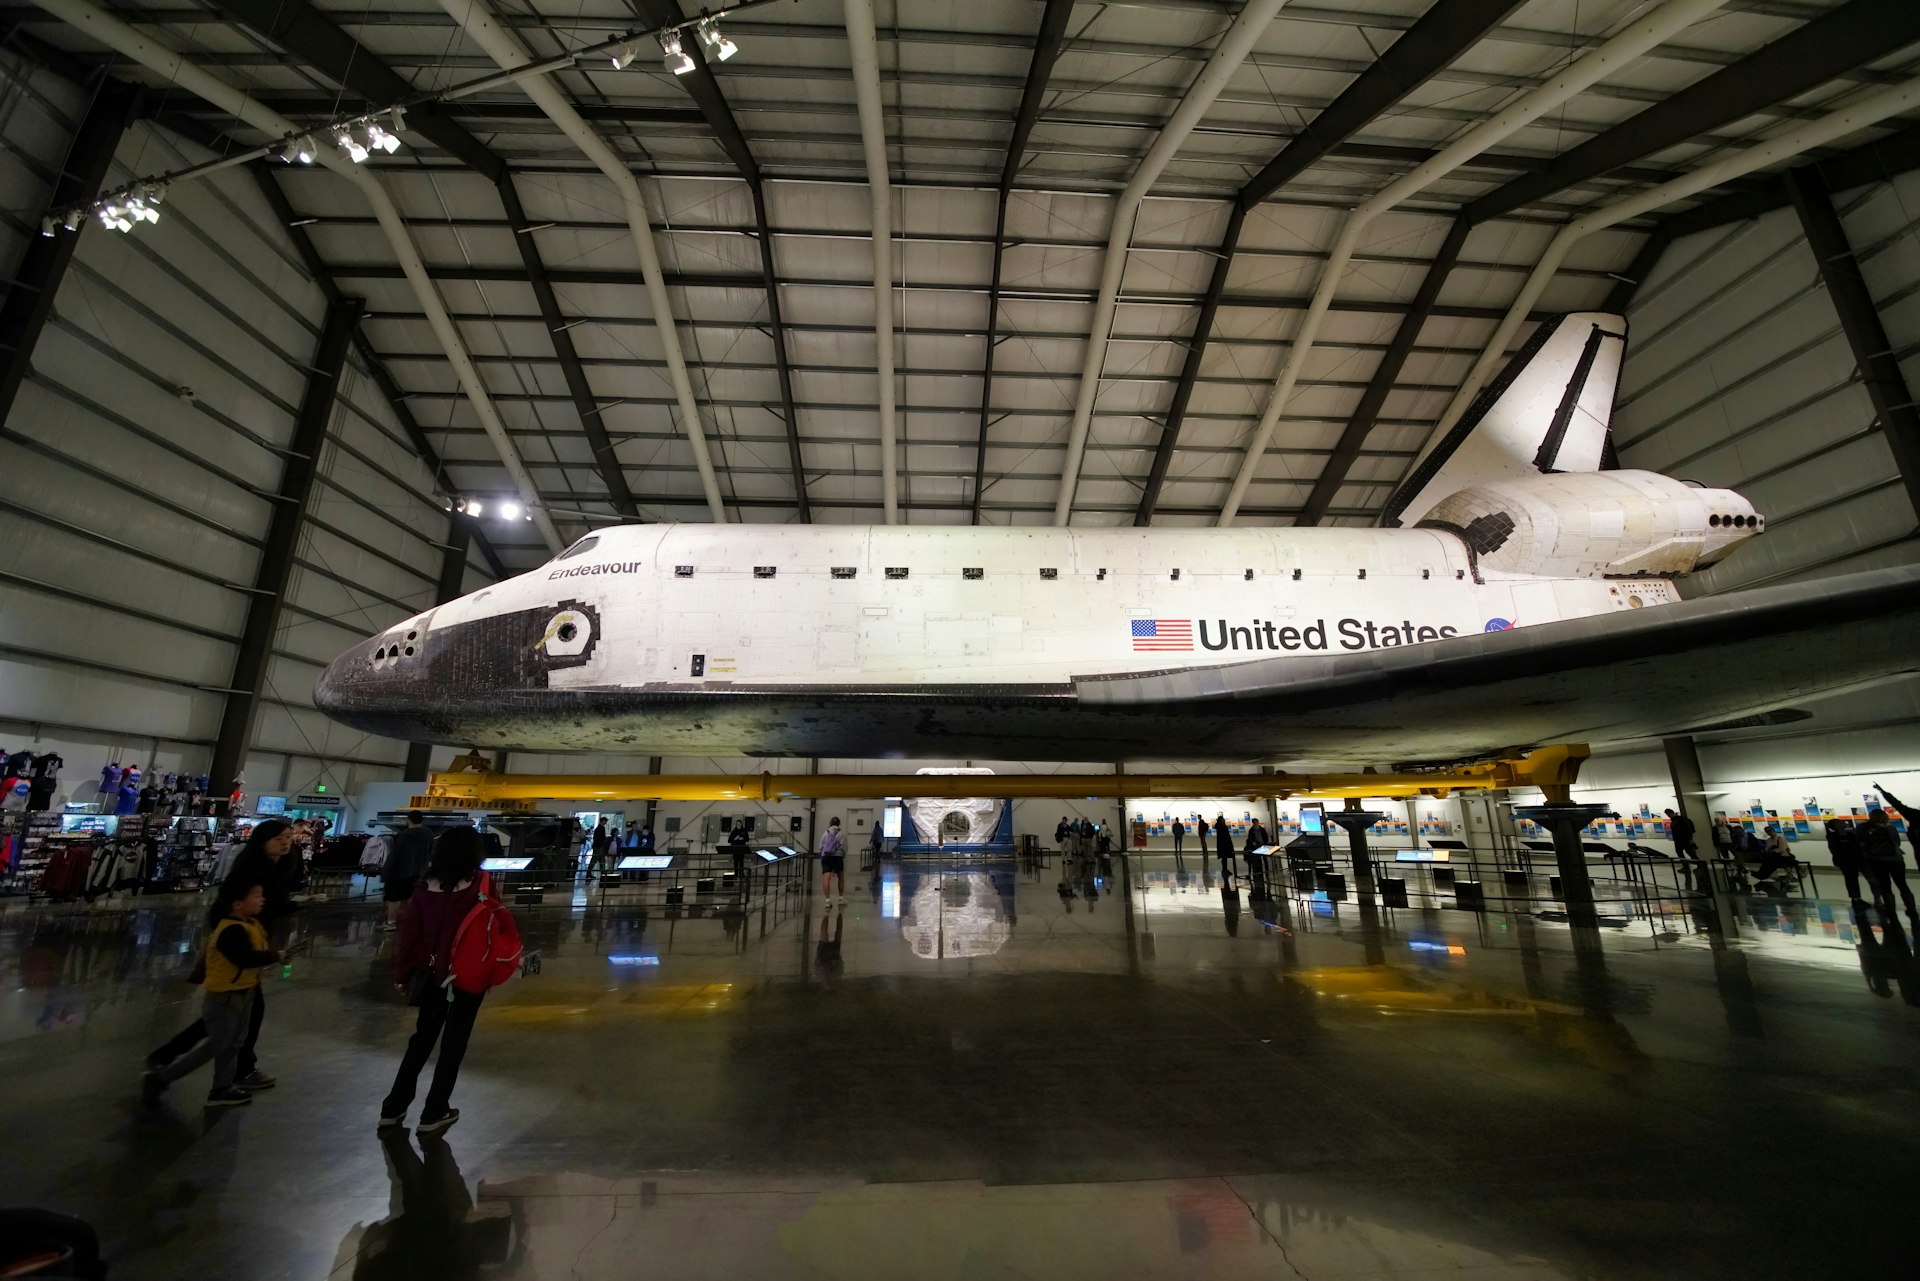 Space shuttle Endeavour at the California Science Center, Los Angeles, California, USA